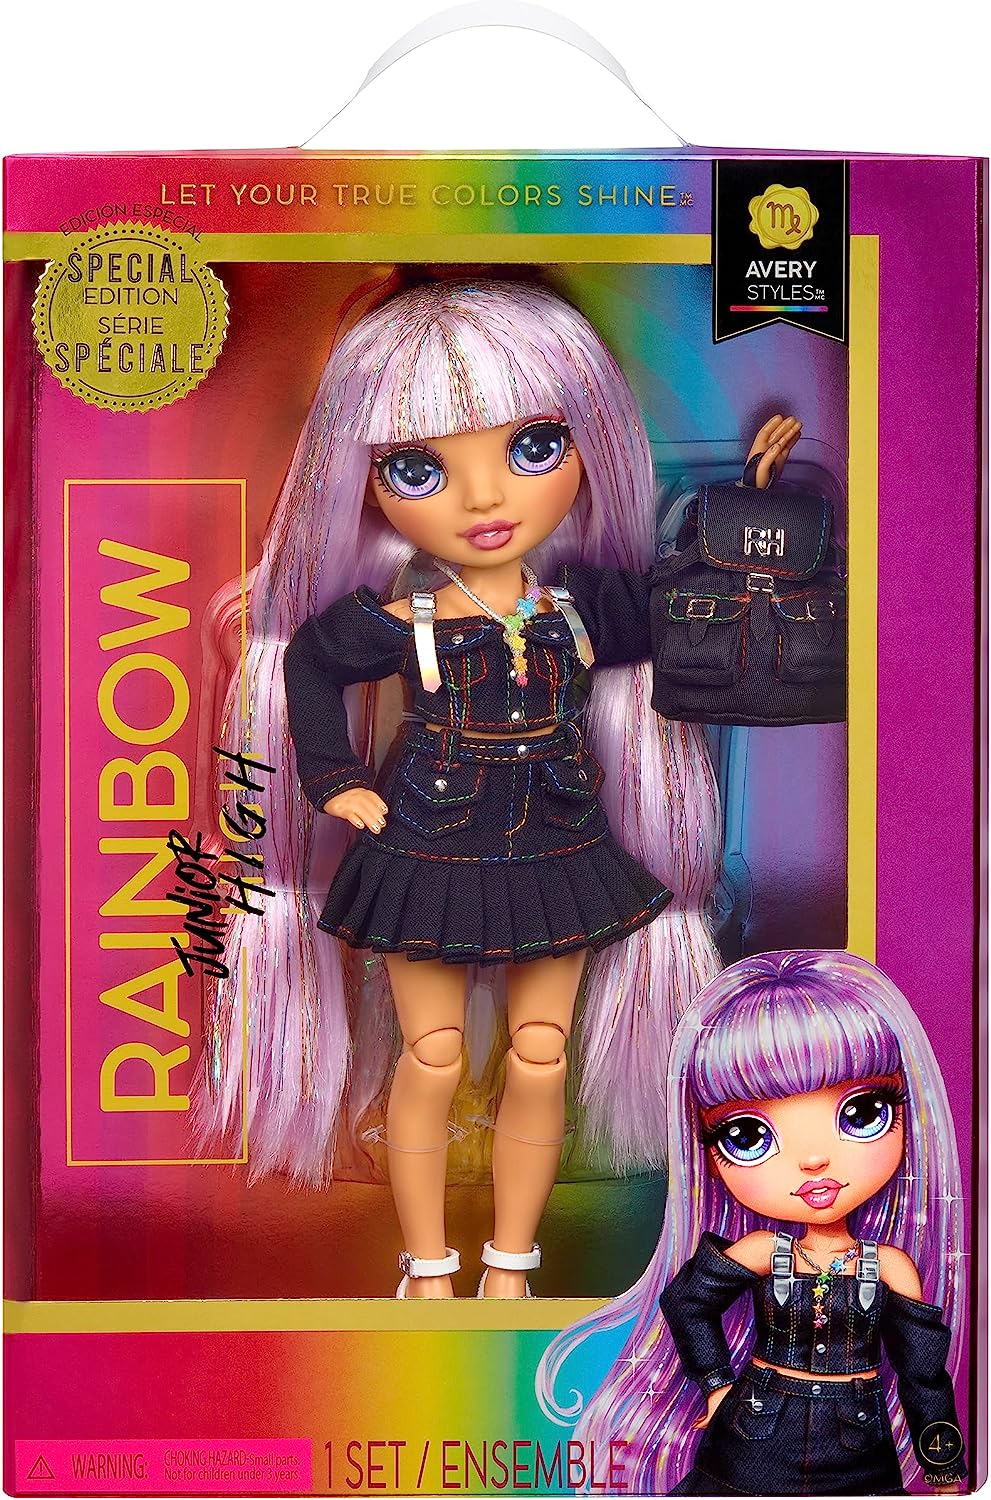 Rainbow High Jr Holly DeVious Posable Doll – L.O.L. Surprise